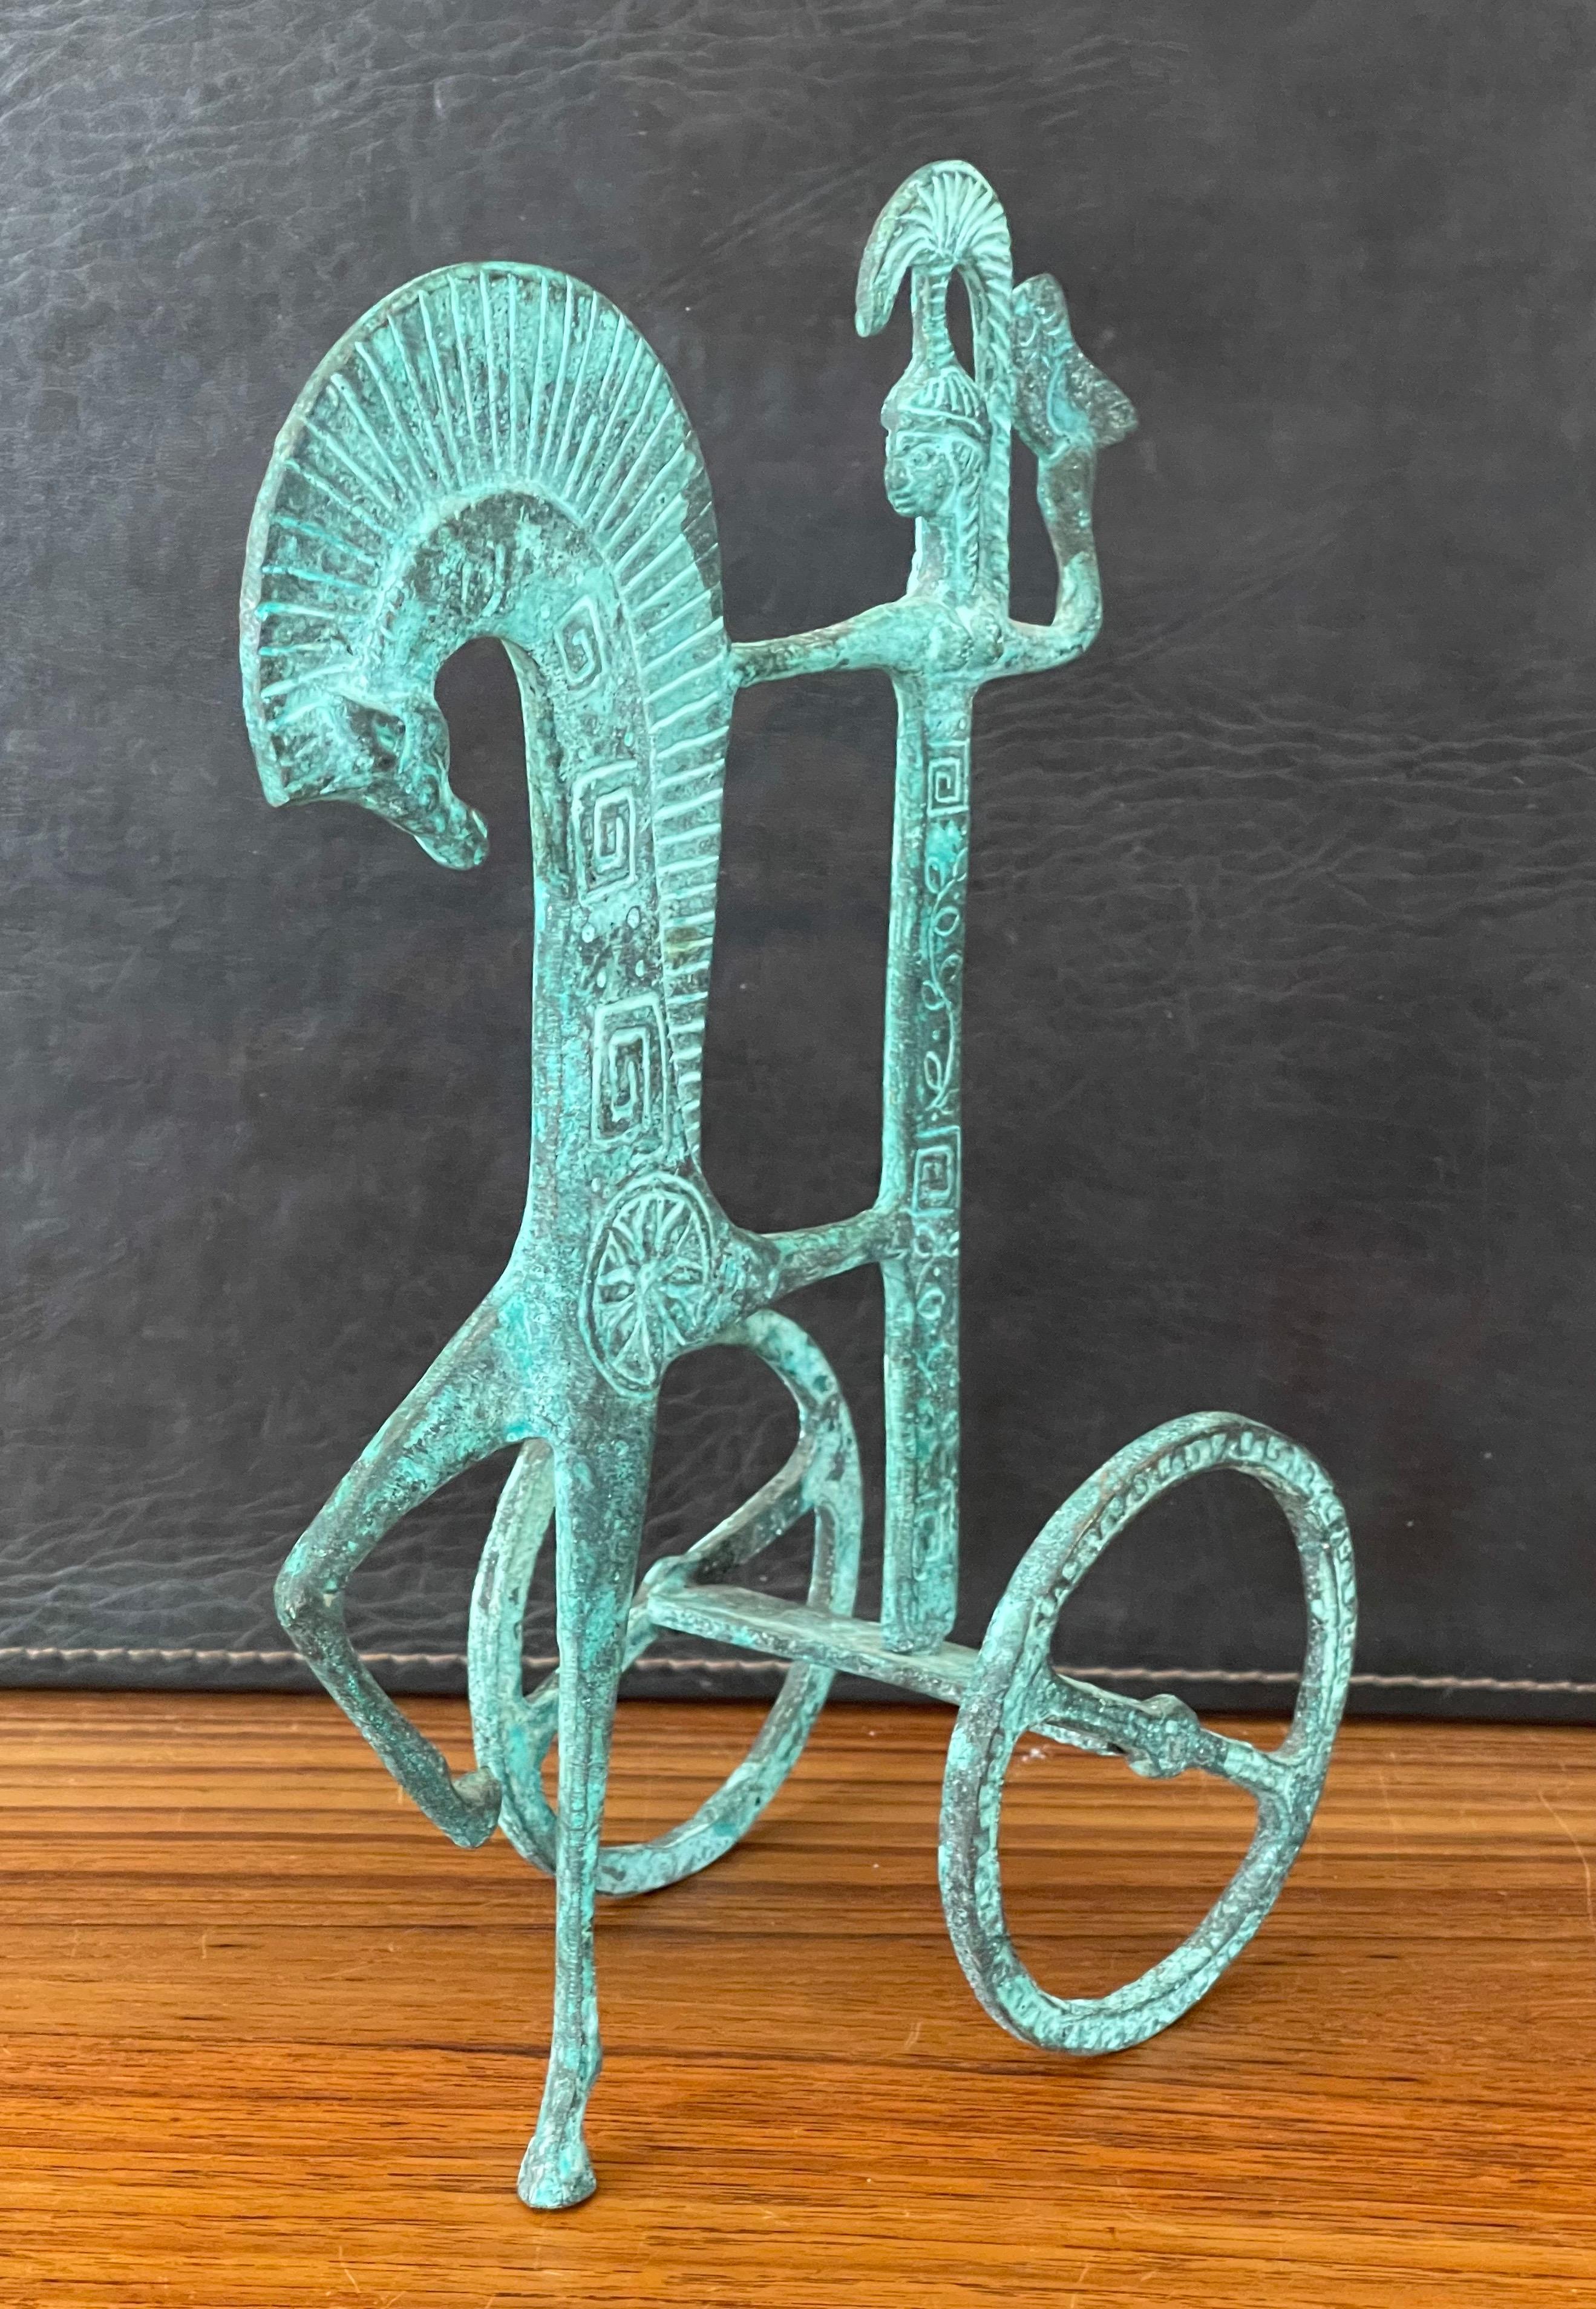 Simple and elegant Etruscan bronze horse and chariot sculpture in the style of Frederick Weinberg, circa 1970s. Minimalist and modern, an ideal midcentury piece decorative piece that has a wonderful verdigris finish. The piece is in very good